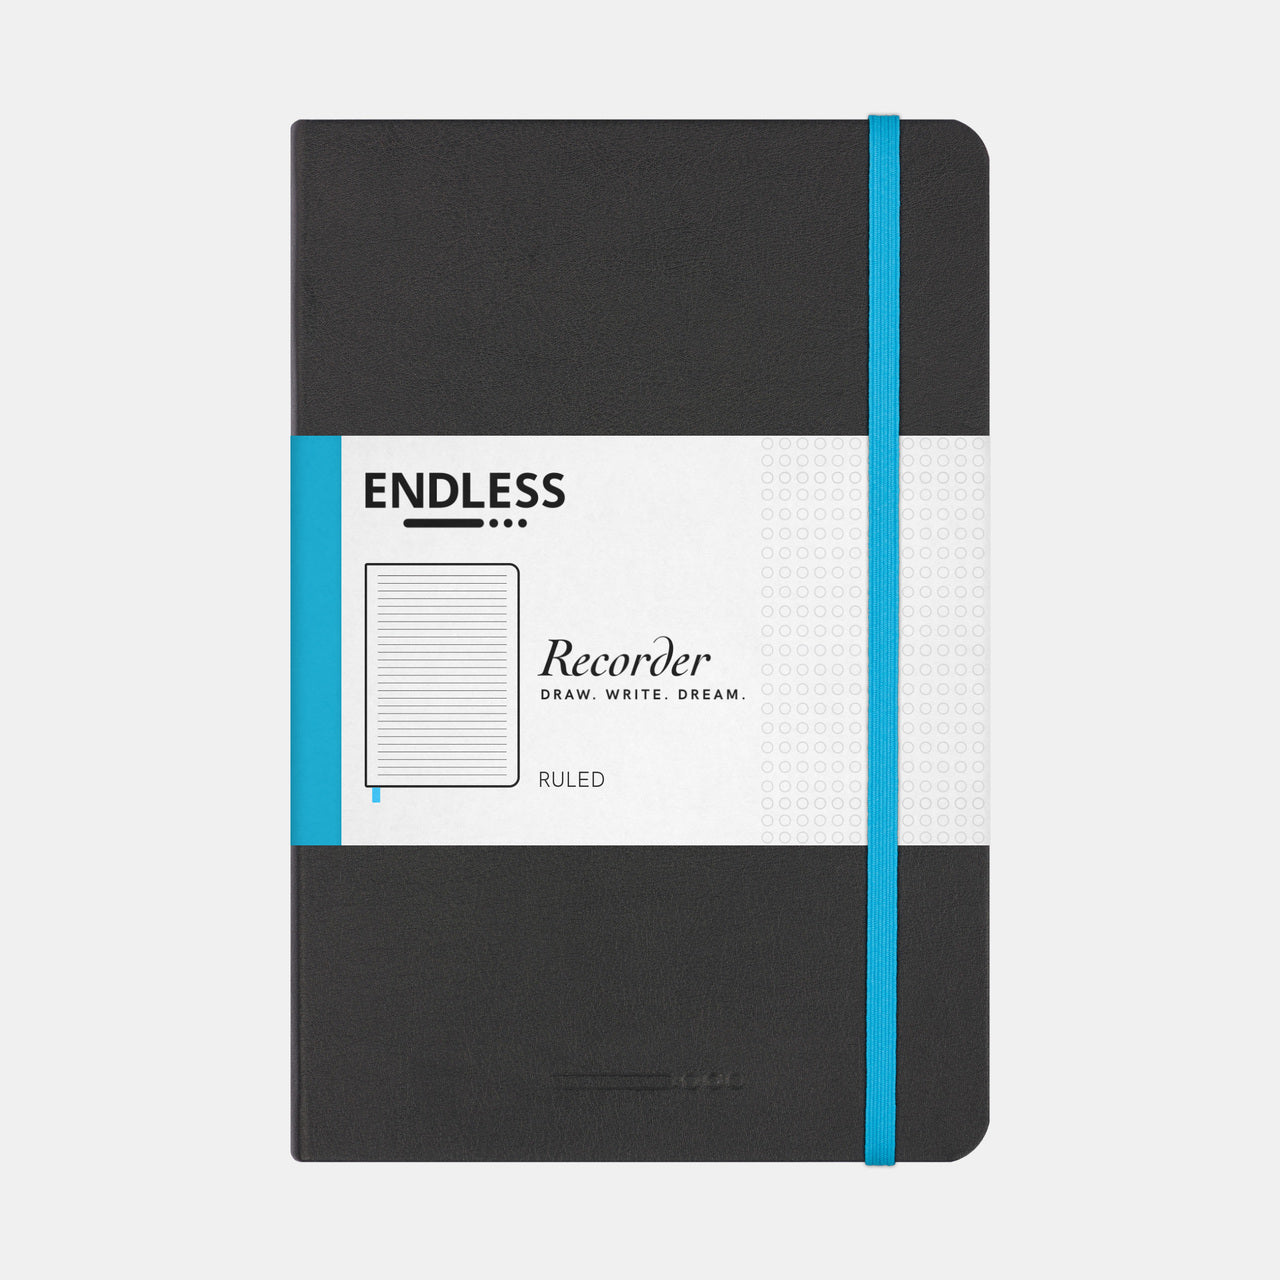 Endless Recorder A5 Journal- Black Cover. 